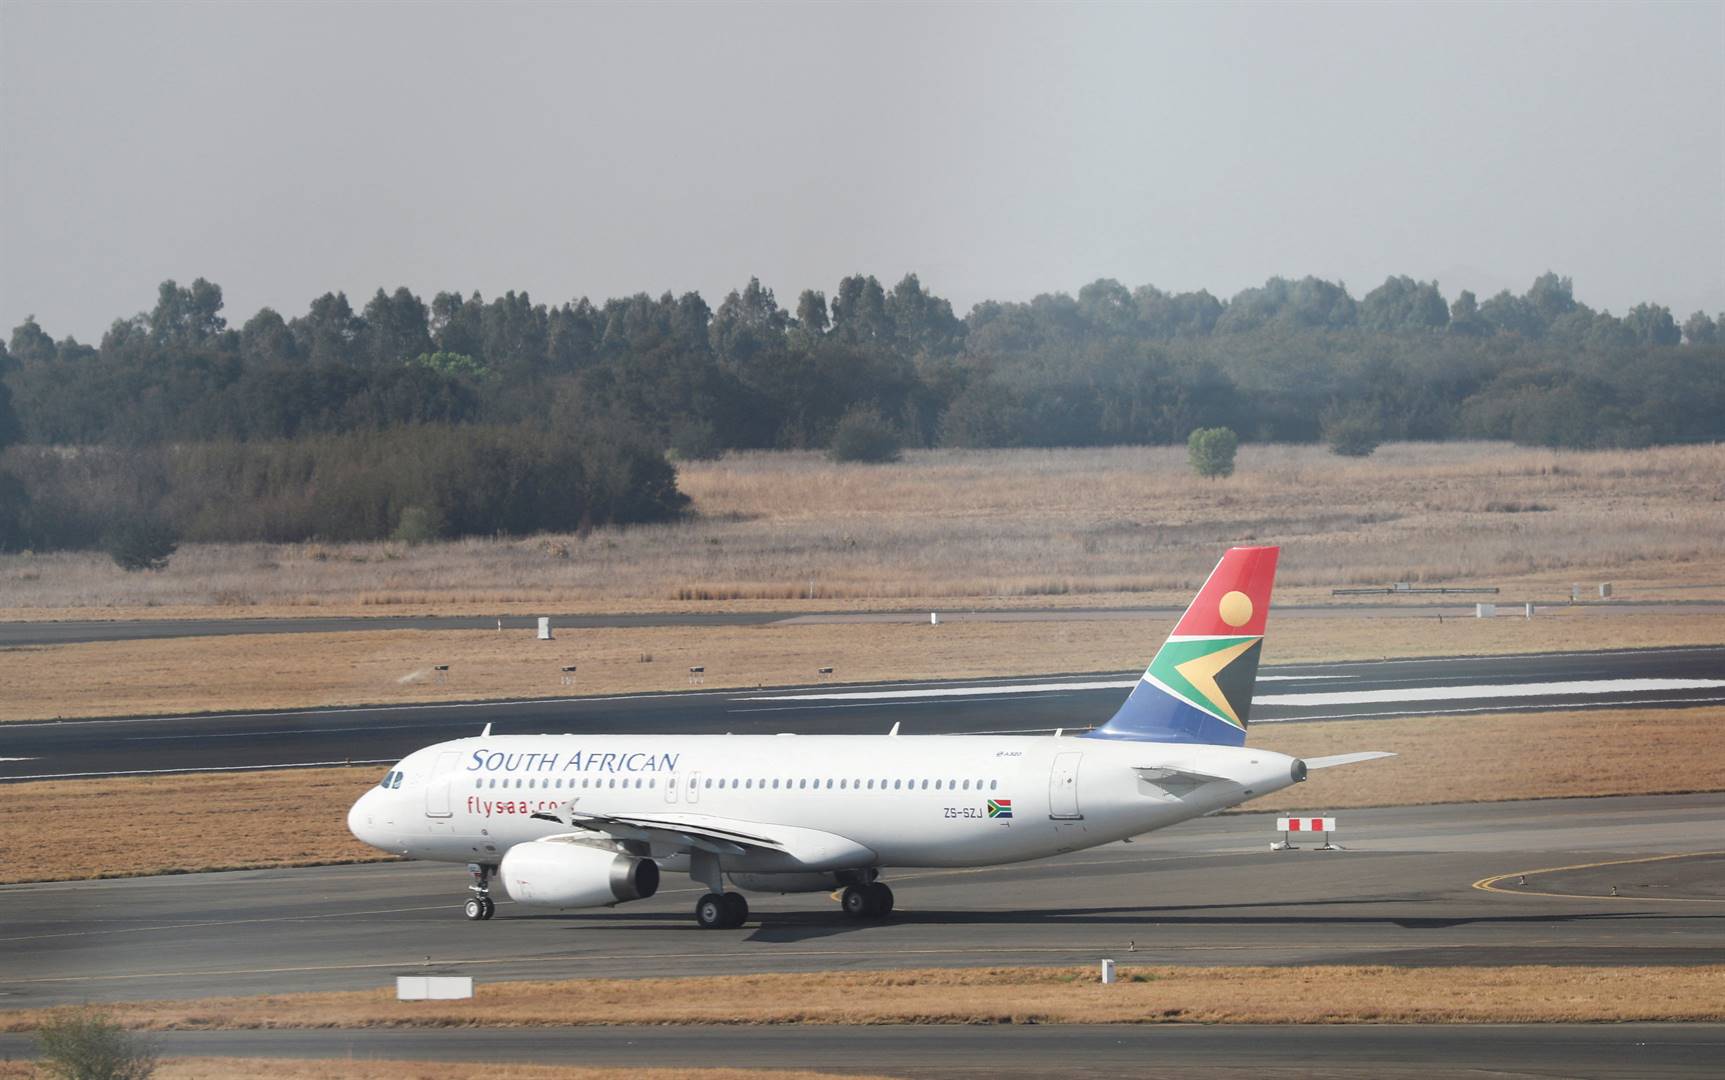 South African Airways is embroiled in a legal battle to recover missing information from a former employee